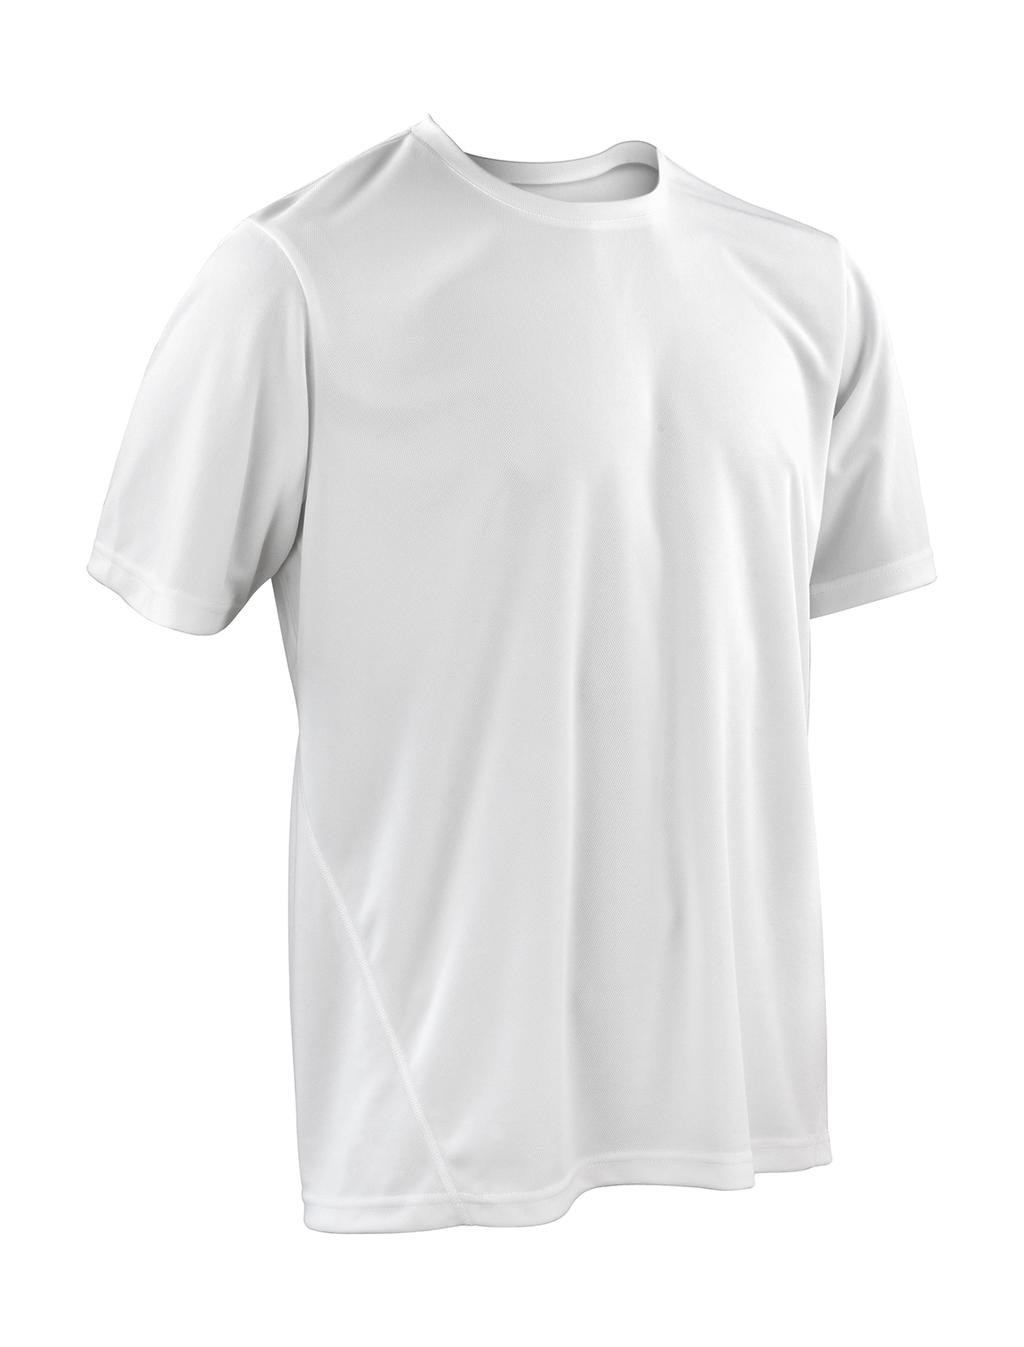  Performance T-Shirt in Farbe White